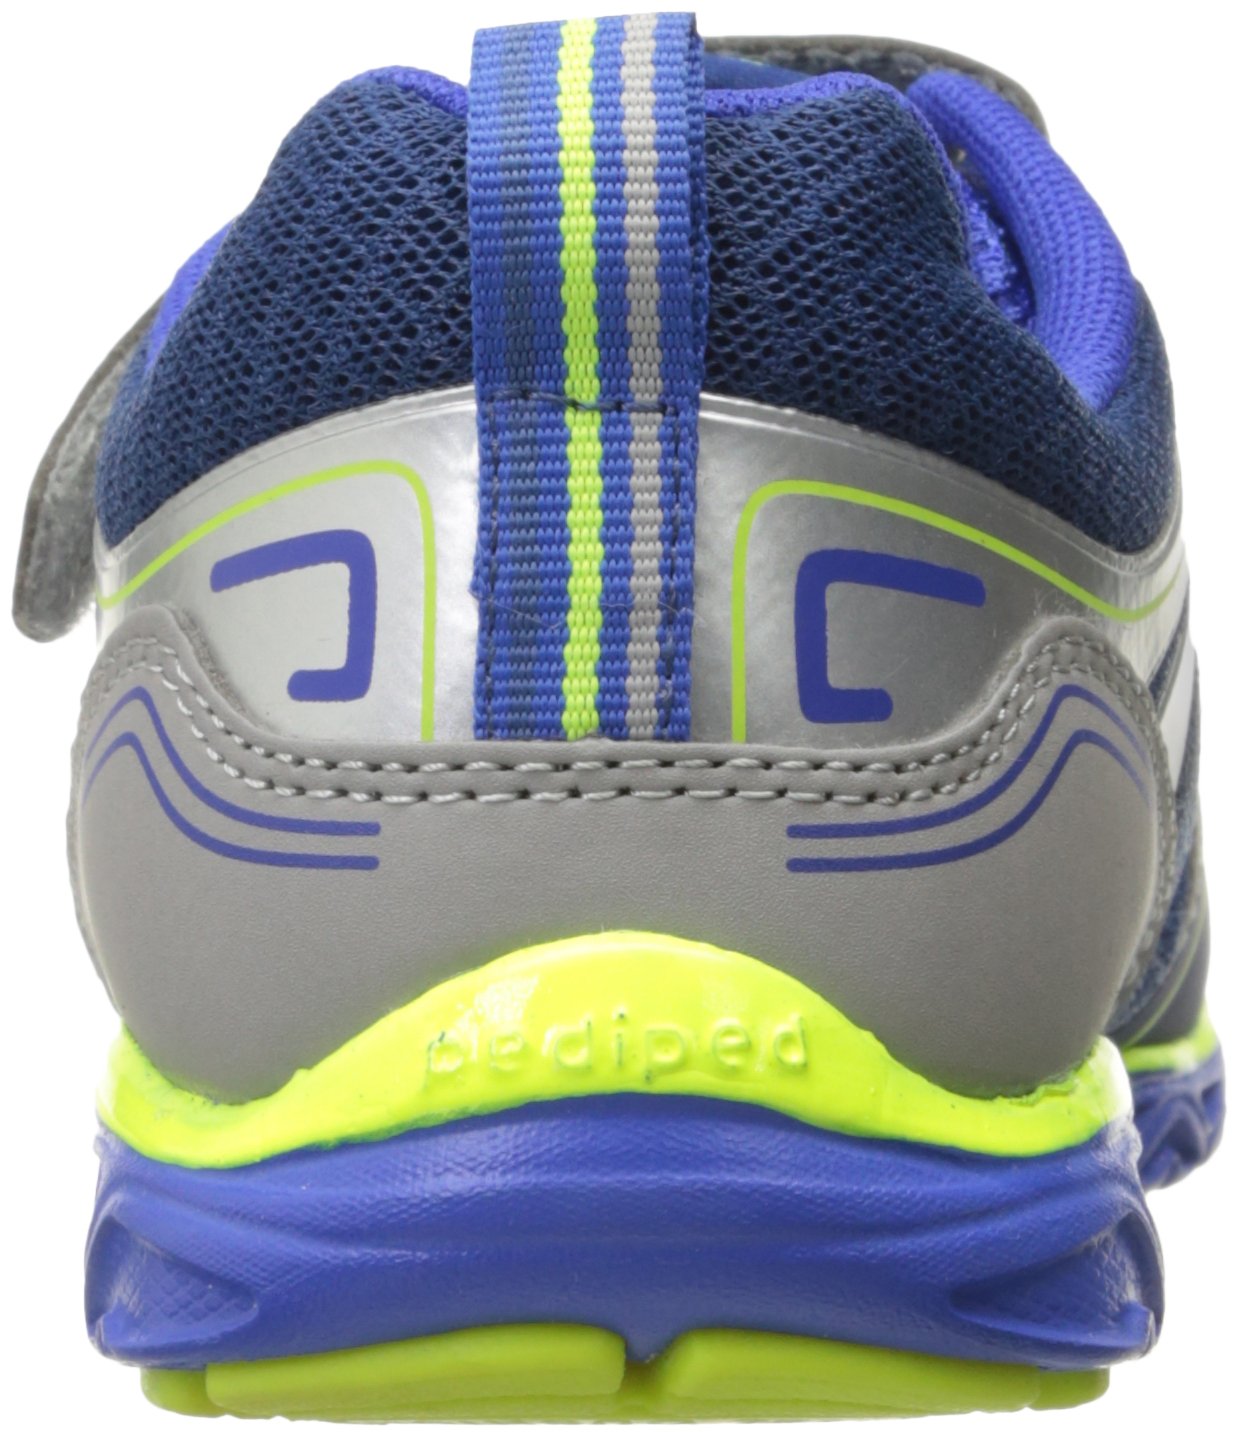 pediped Unisex-Child Force Sneaker